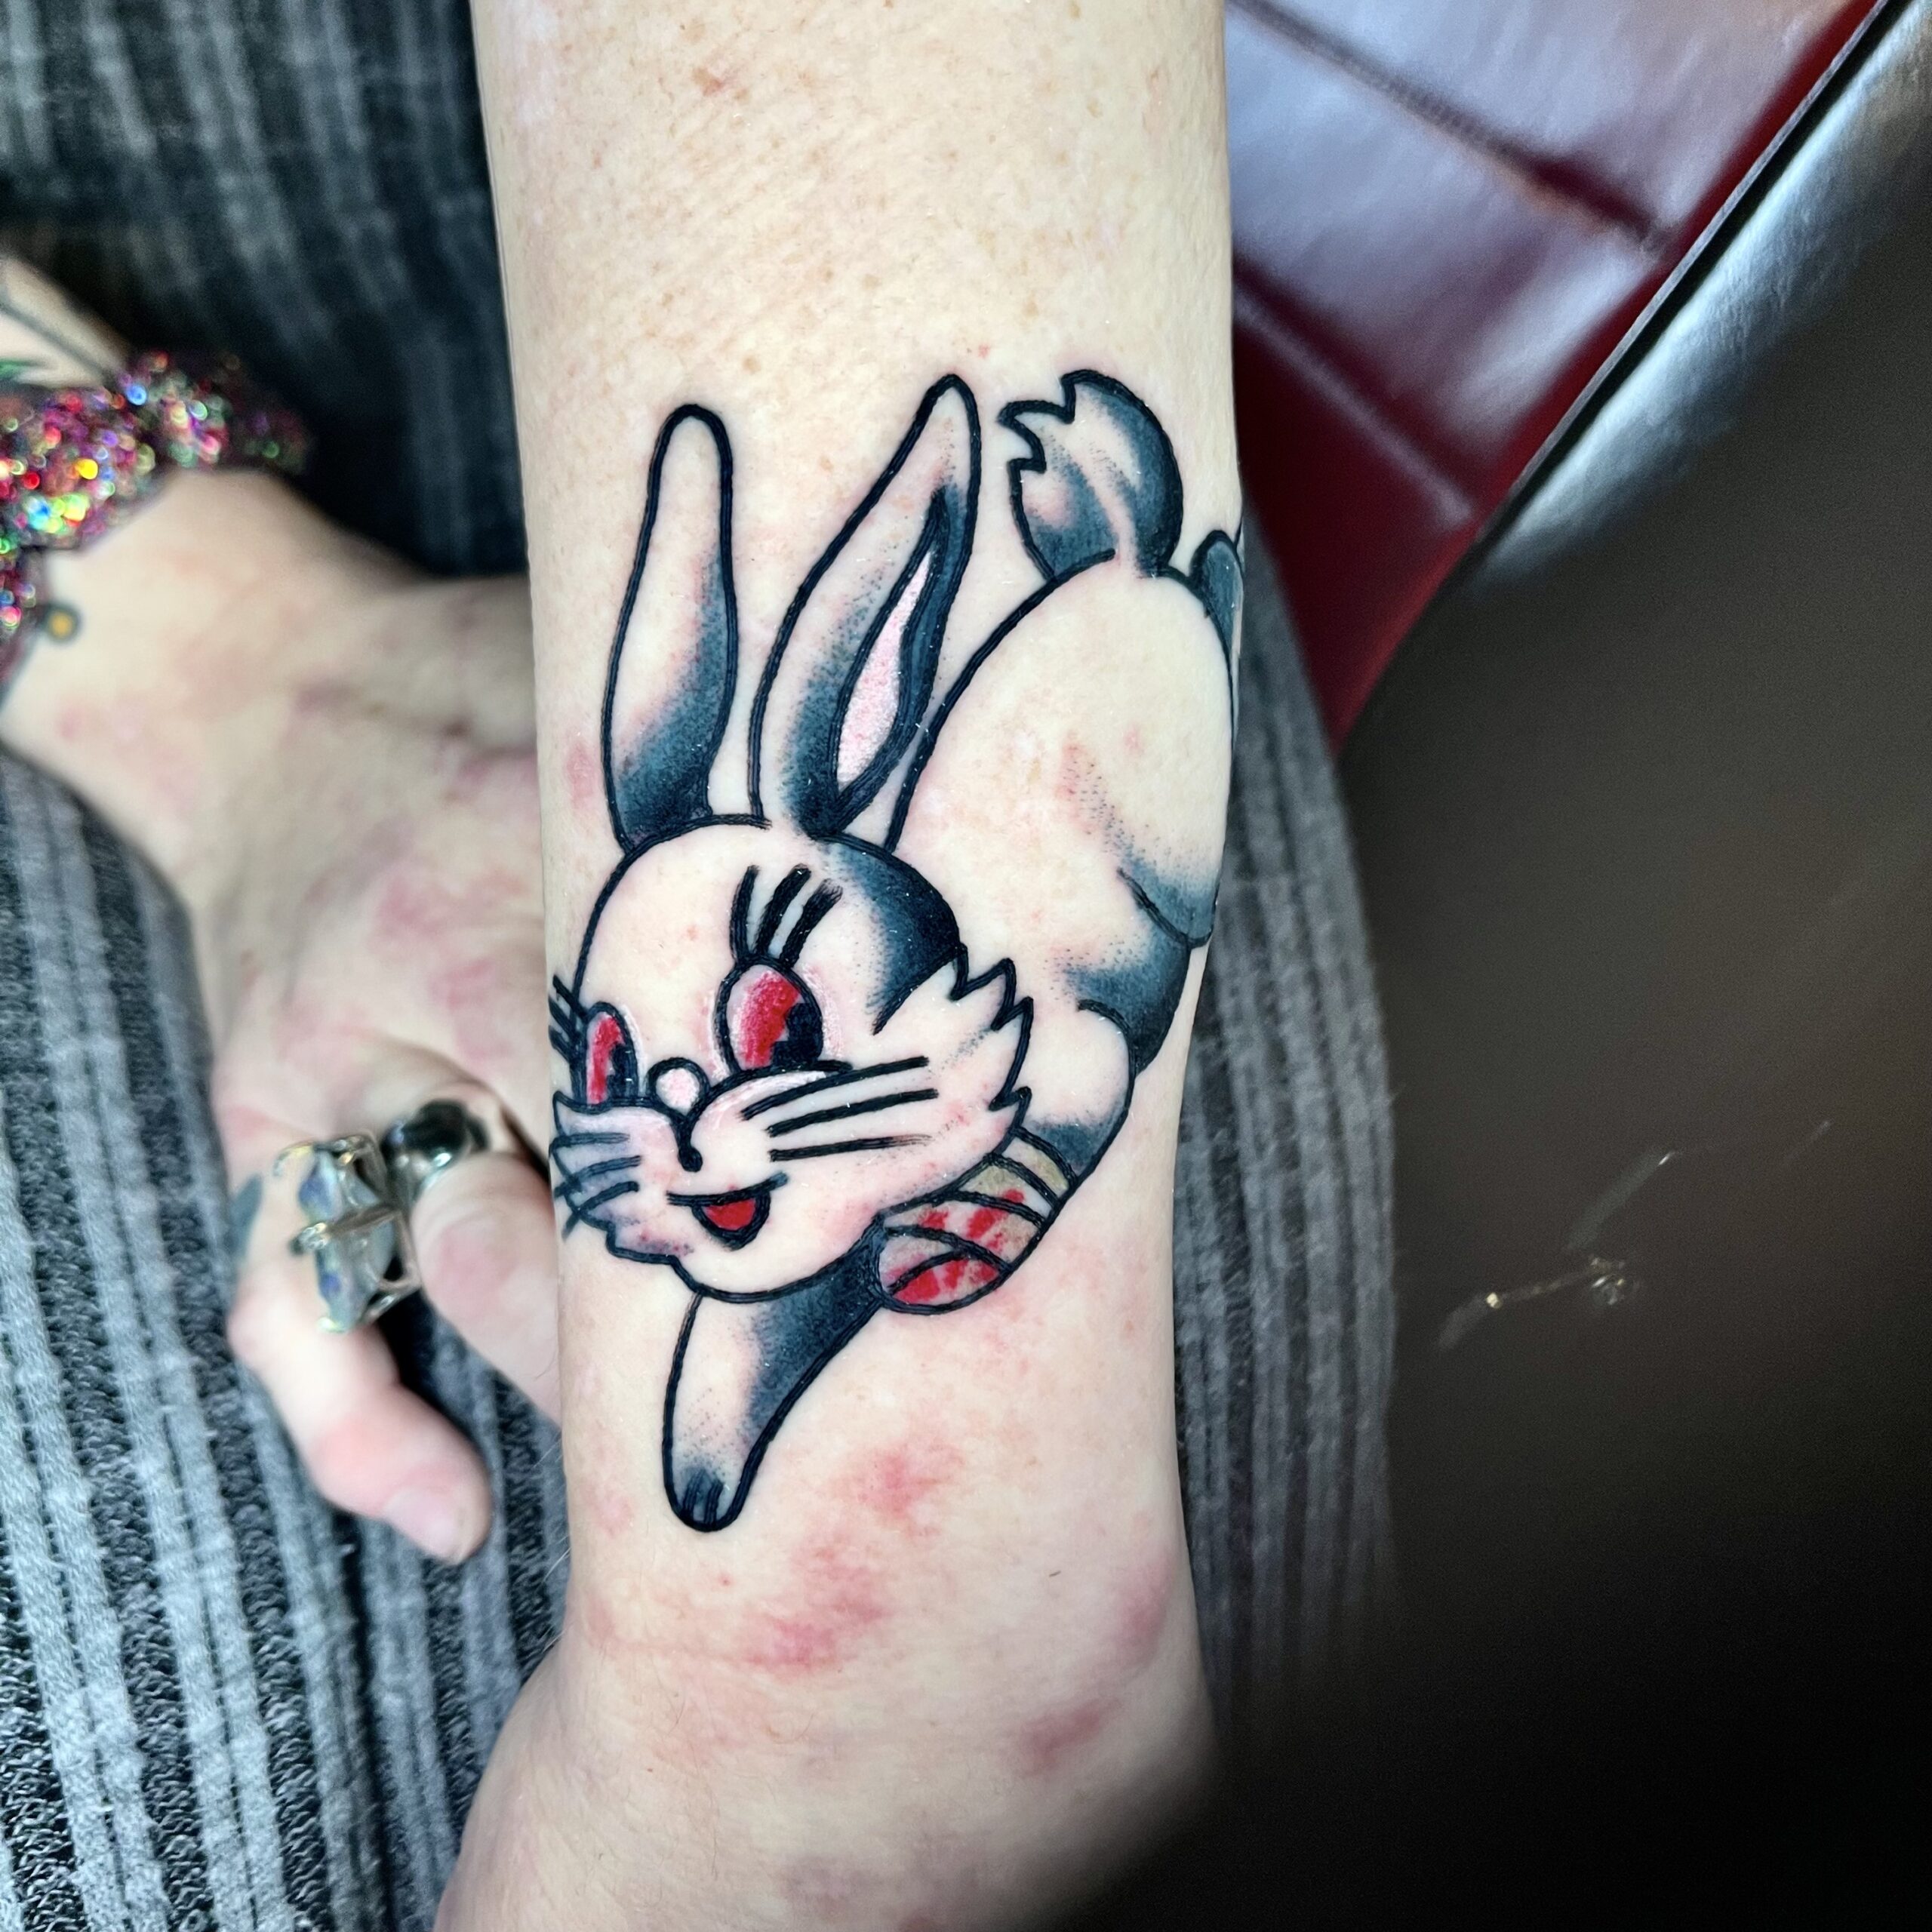 tattoo of a bunny on a woman's arm